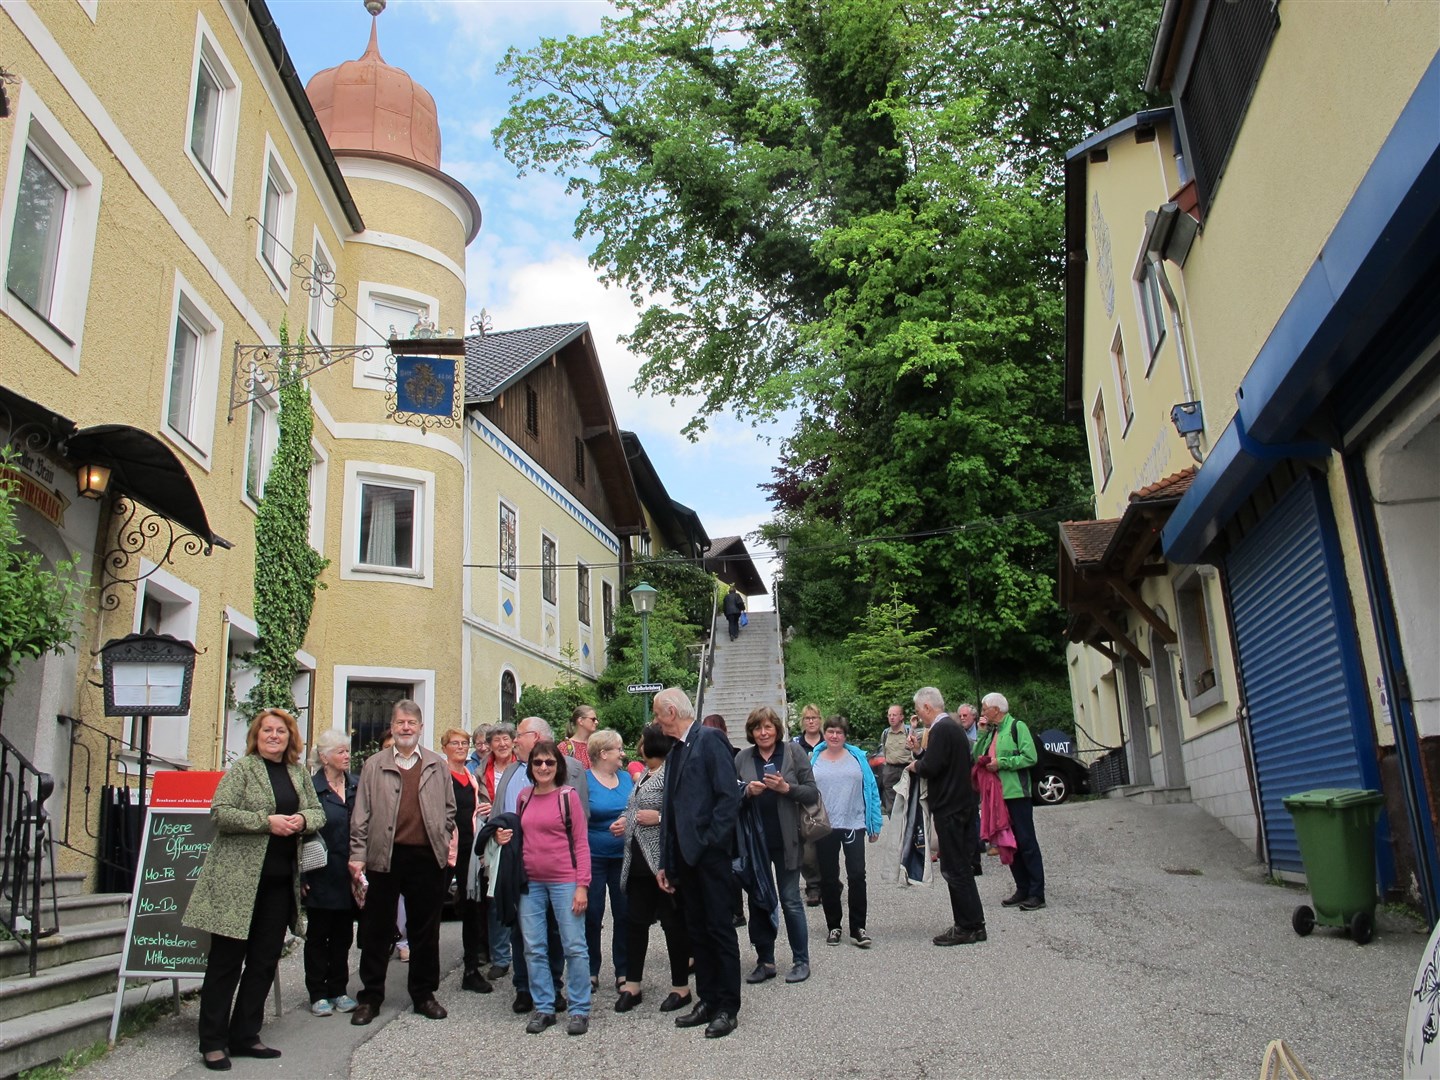 After lunch at the Brauwirtshaus in Ried im Innkreis and before a guided tour of the town.